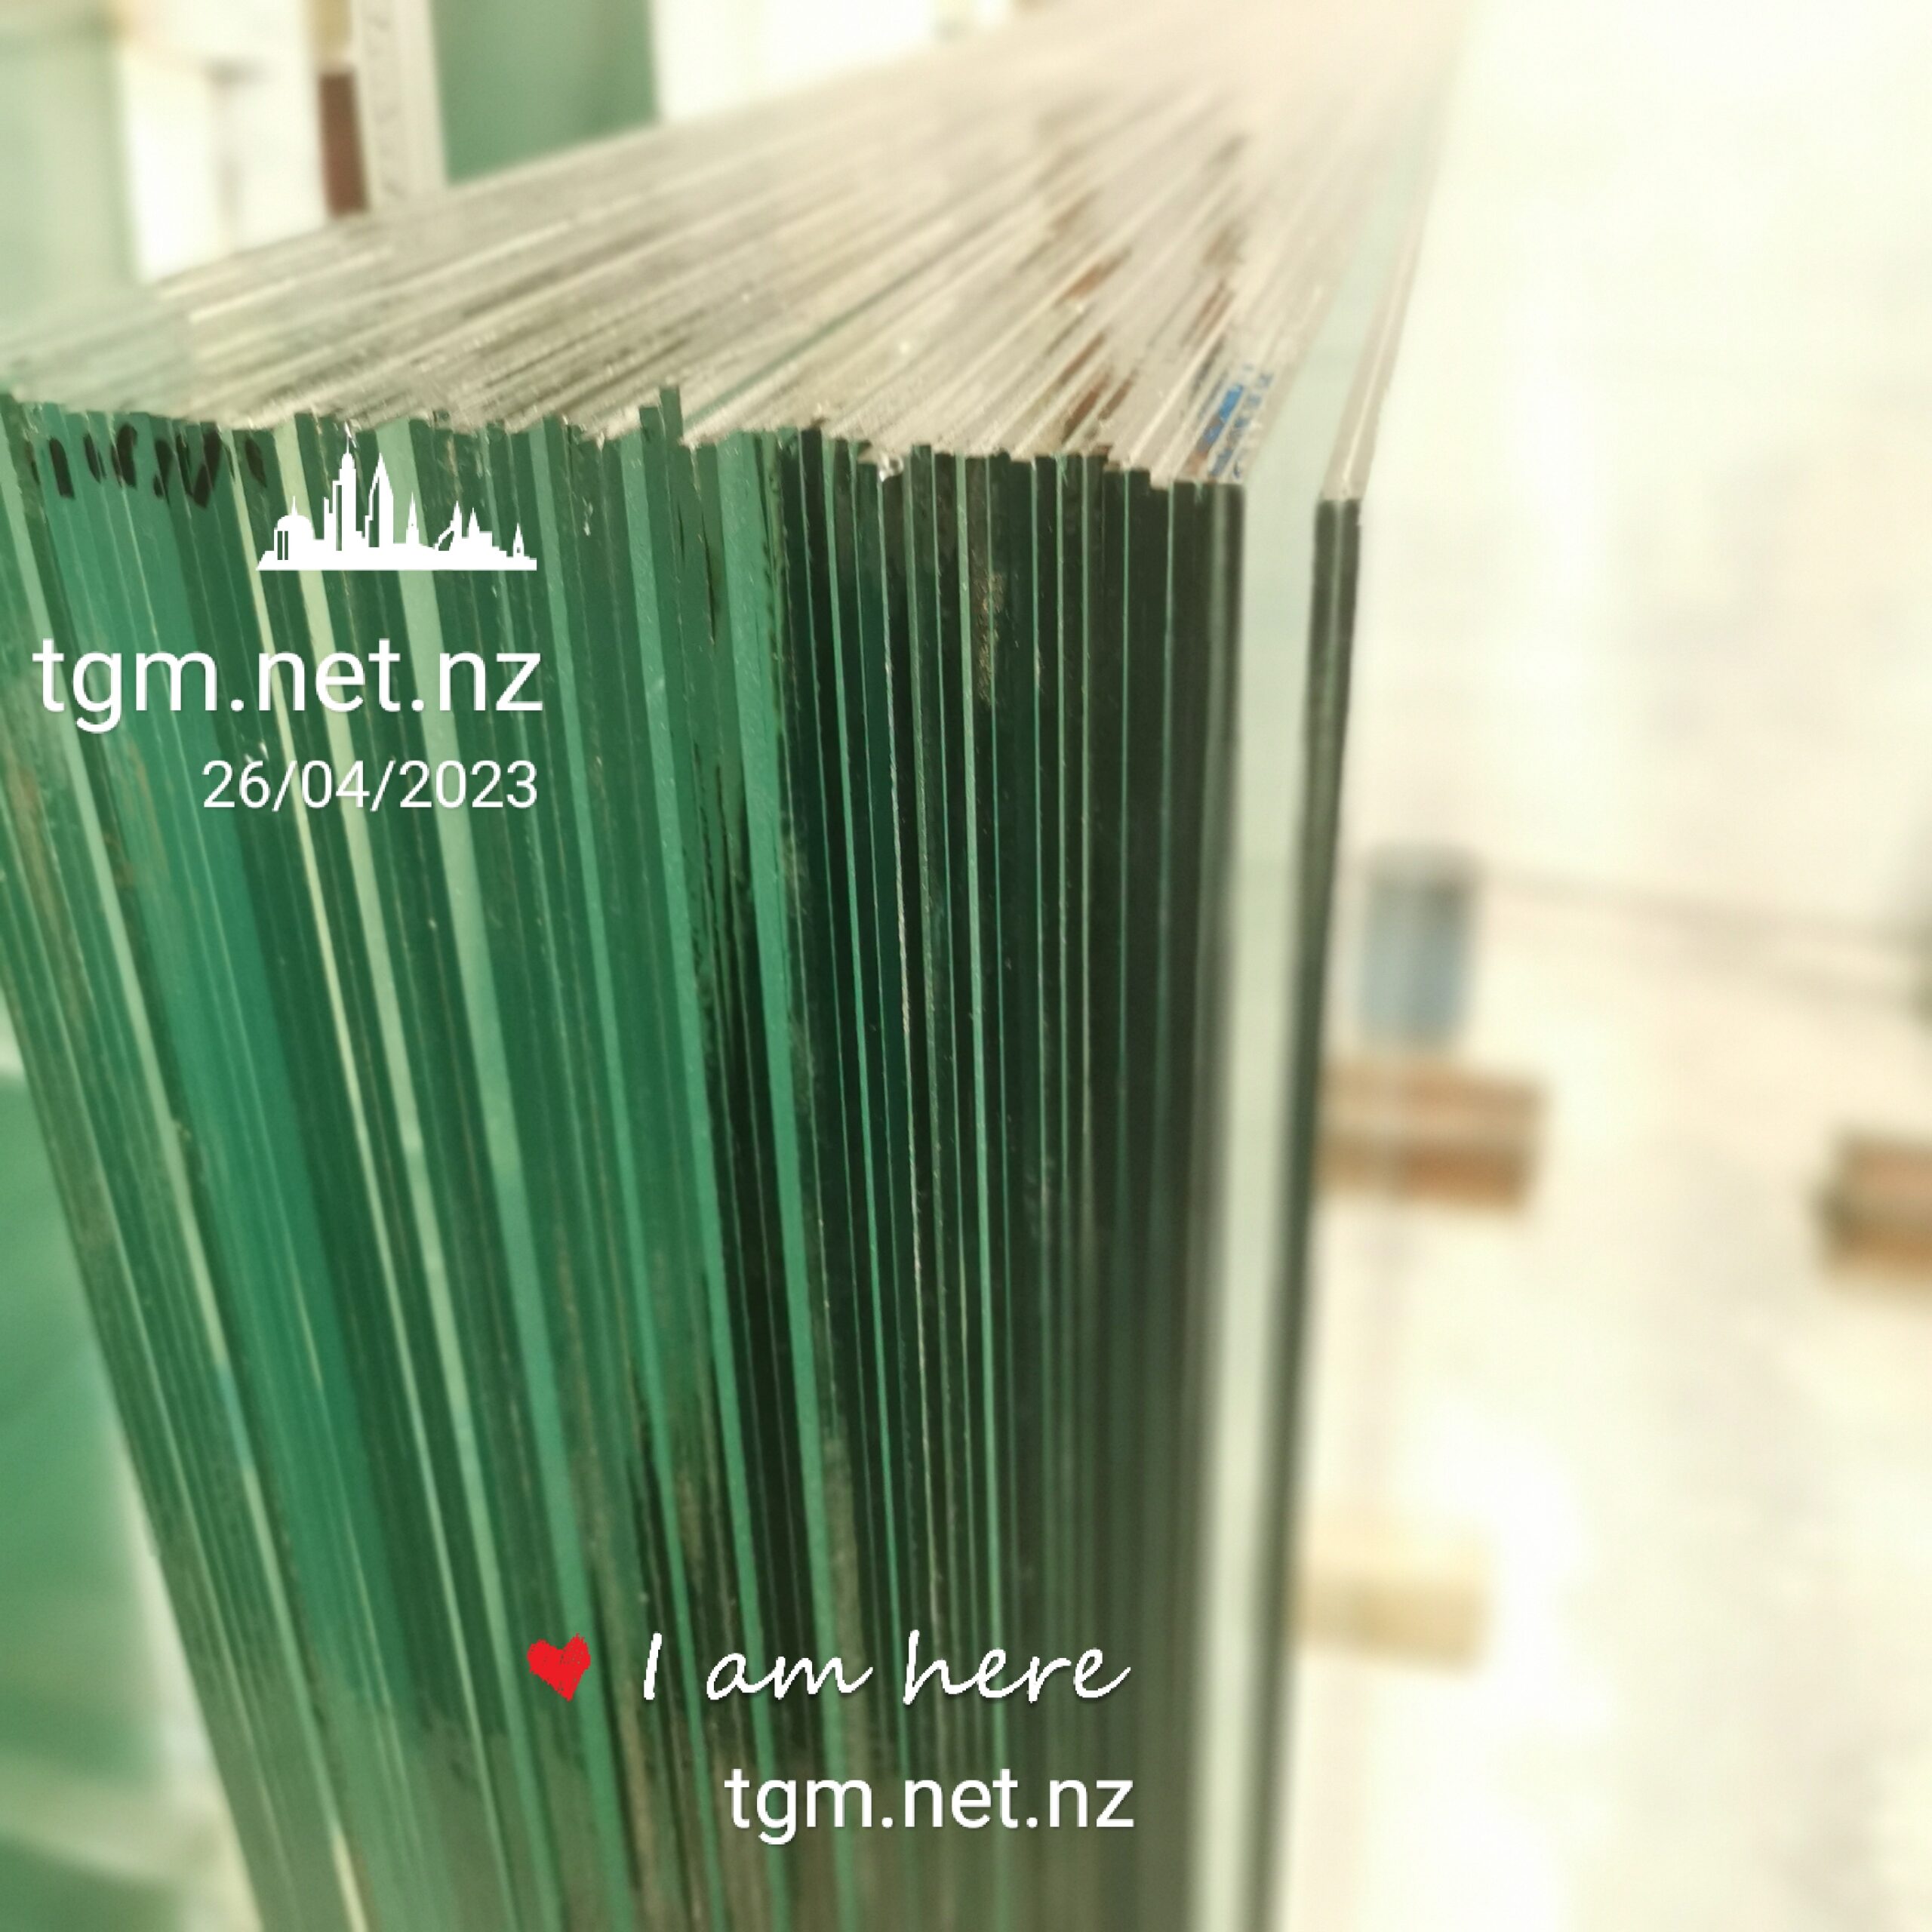 6.38mm laminated glass
tgm.net.nz
stock for sales
6.38mm lami
6.38mm laminated glass for sale